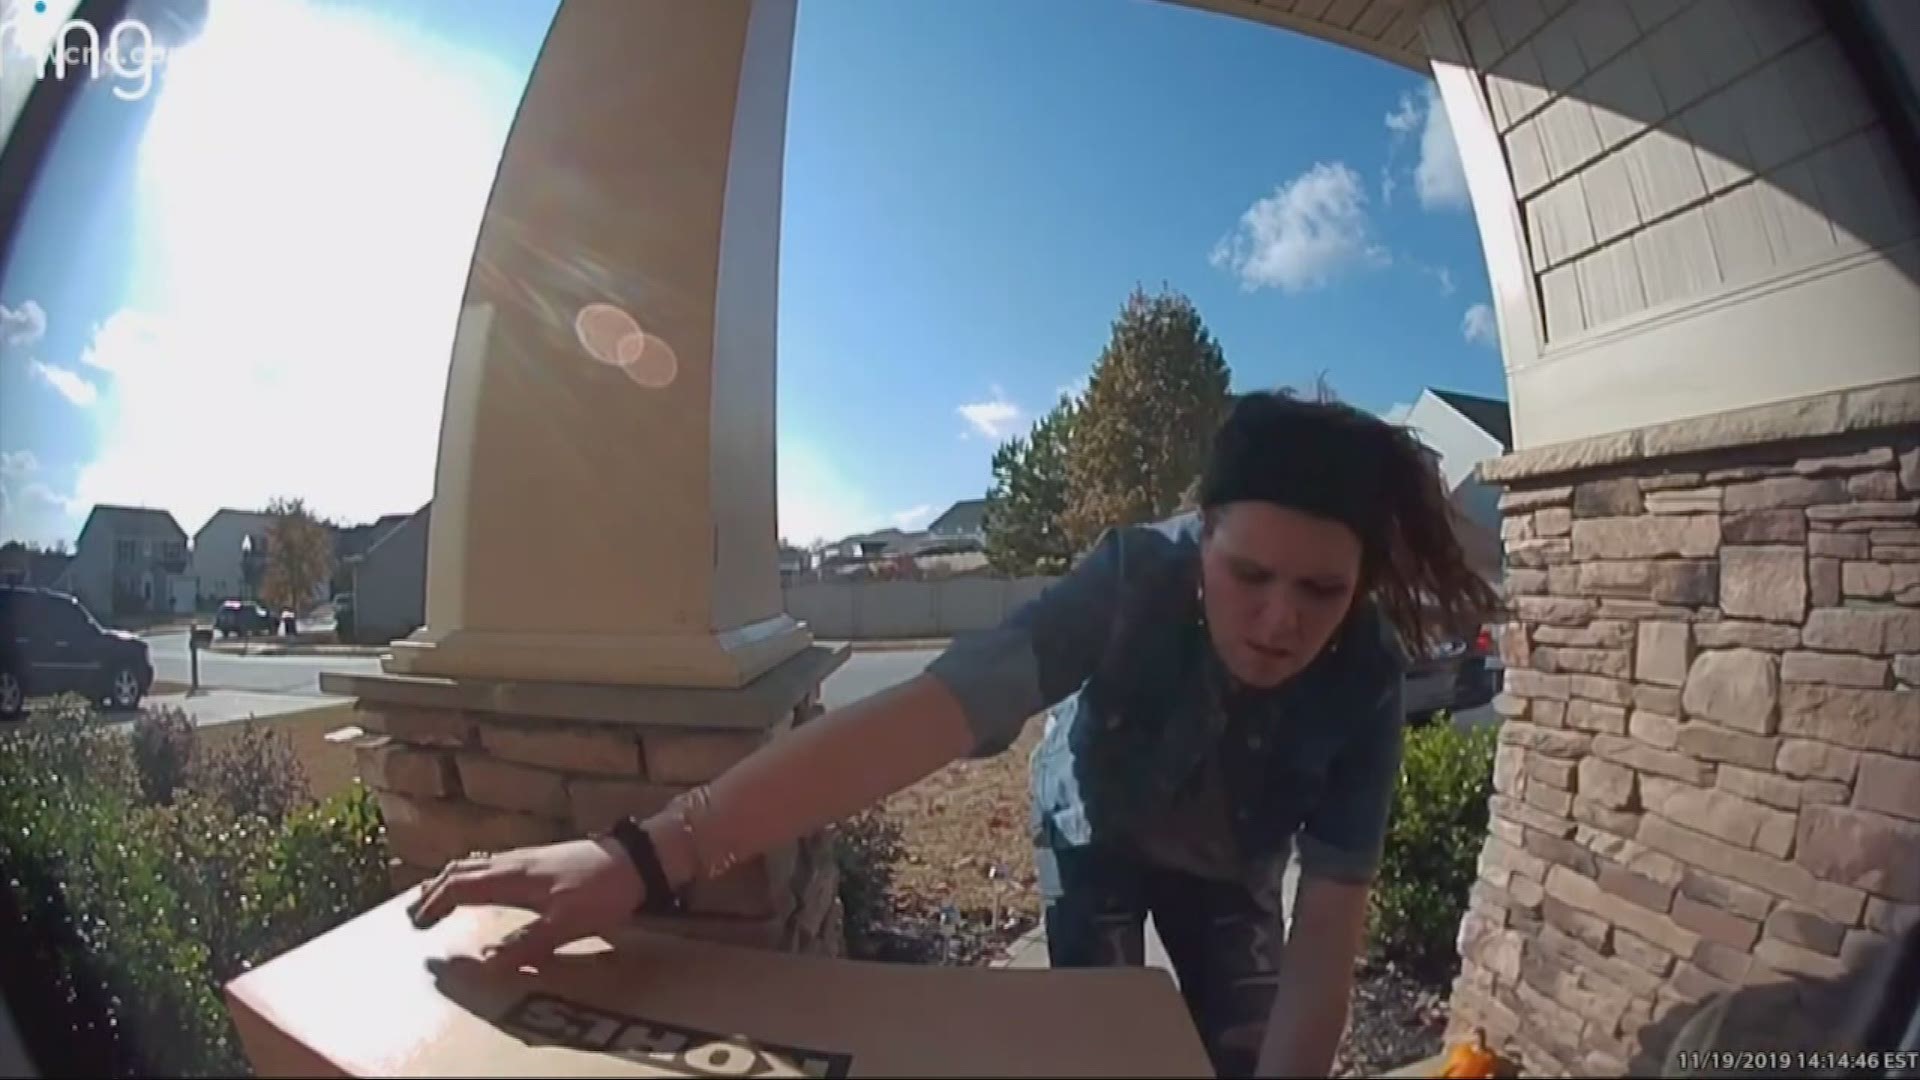 A doorbell camera caught the suspected thief in the act stealing not one but two different packages just minutes after UPS made the delivery.